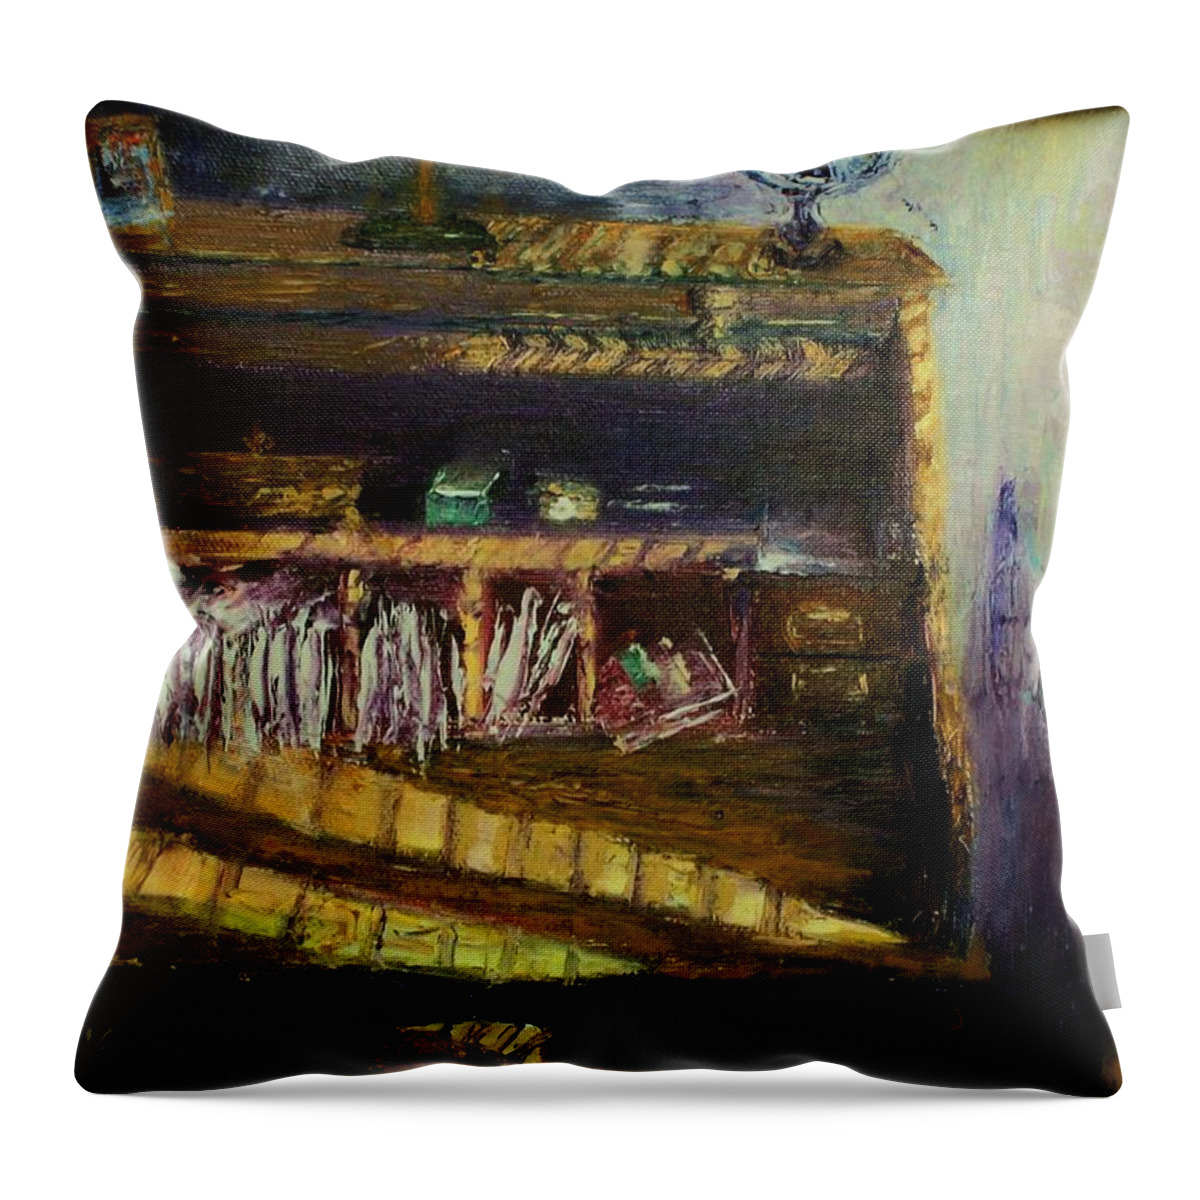 Oil Throw Pillow featuring the painting Rolltop by Stephen King